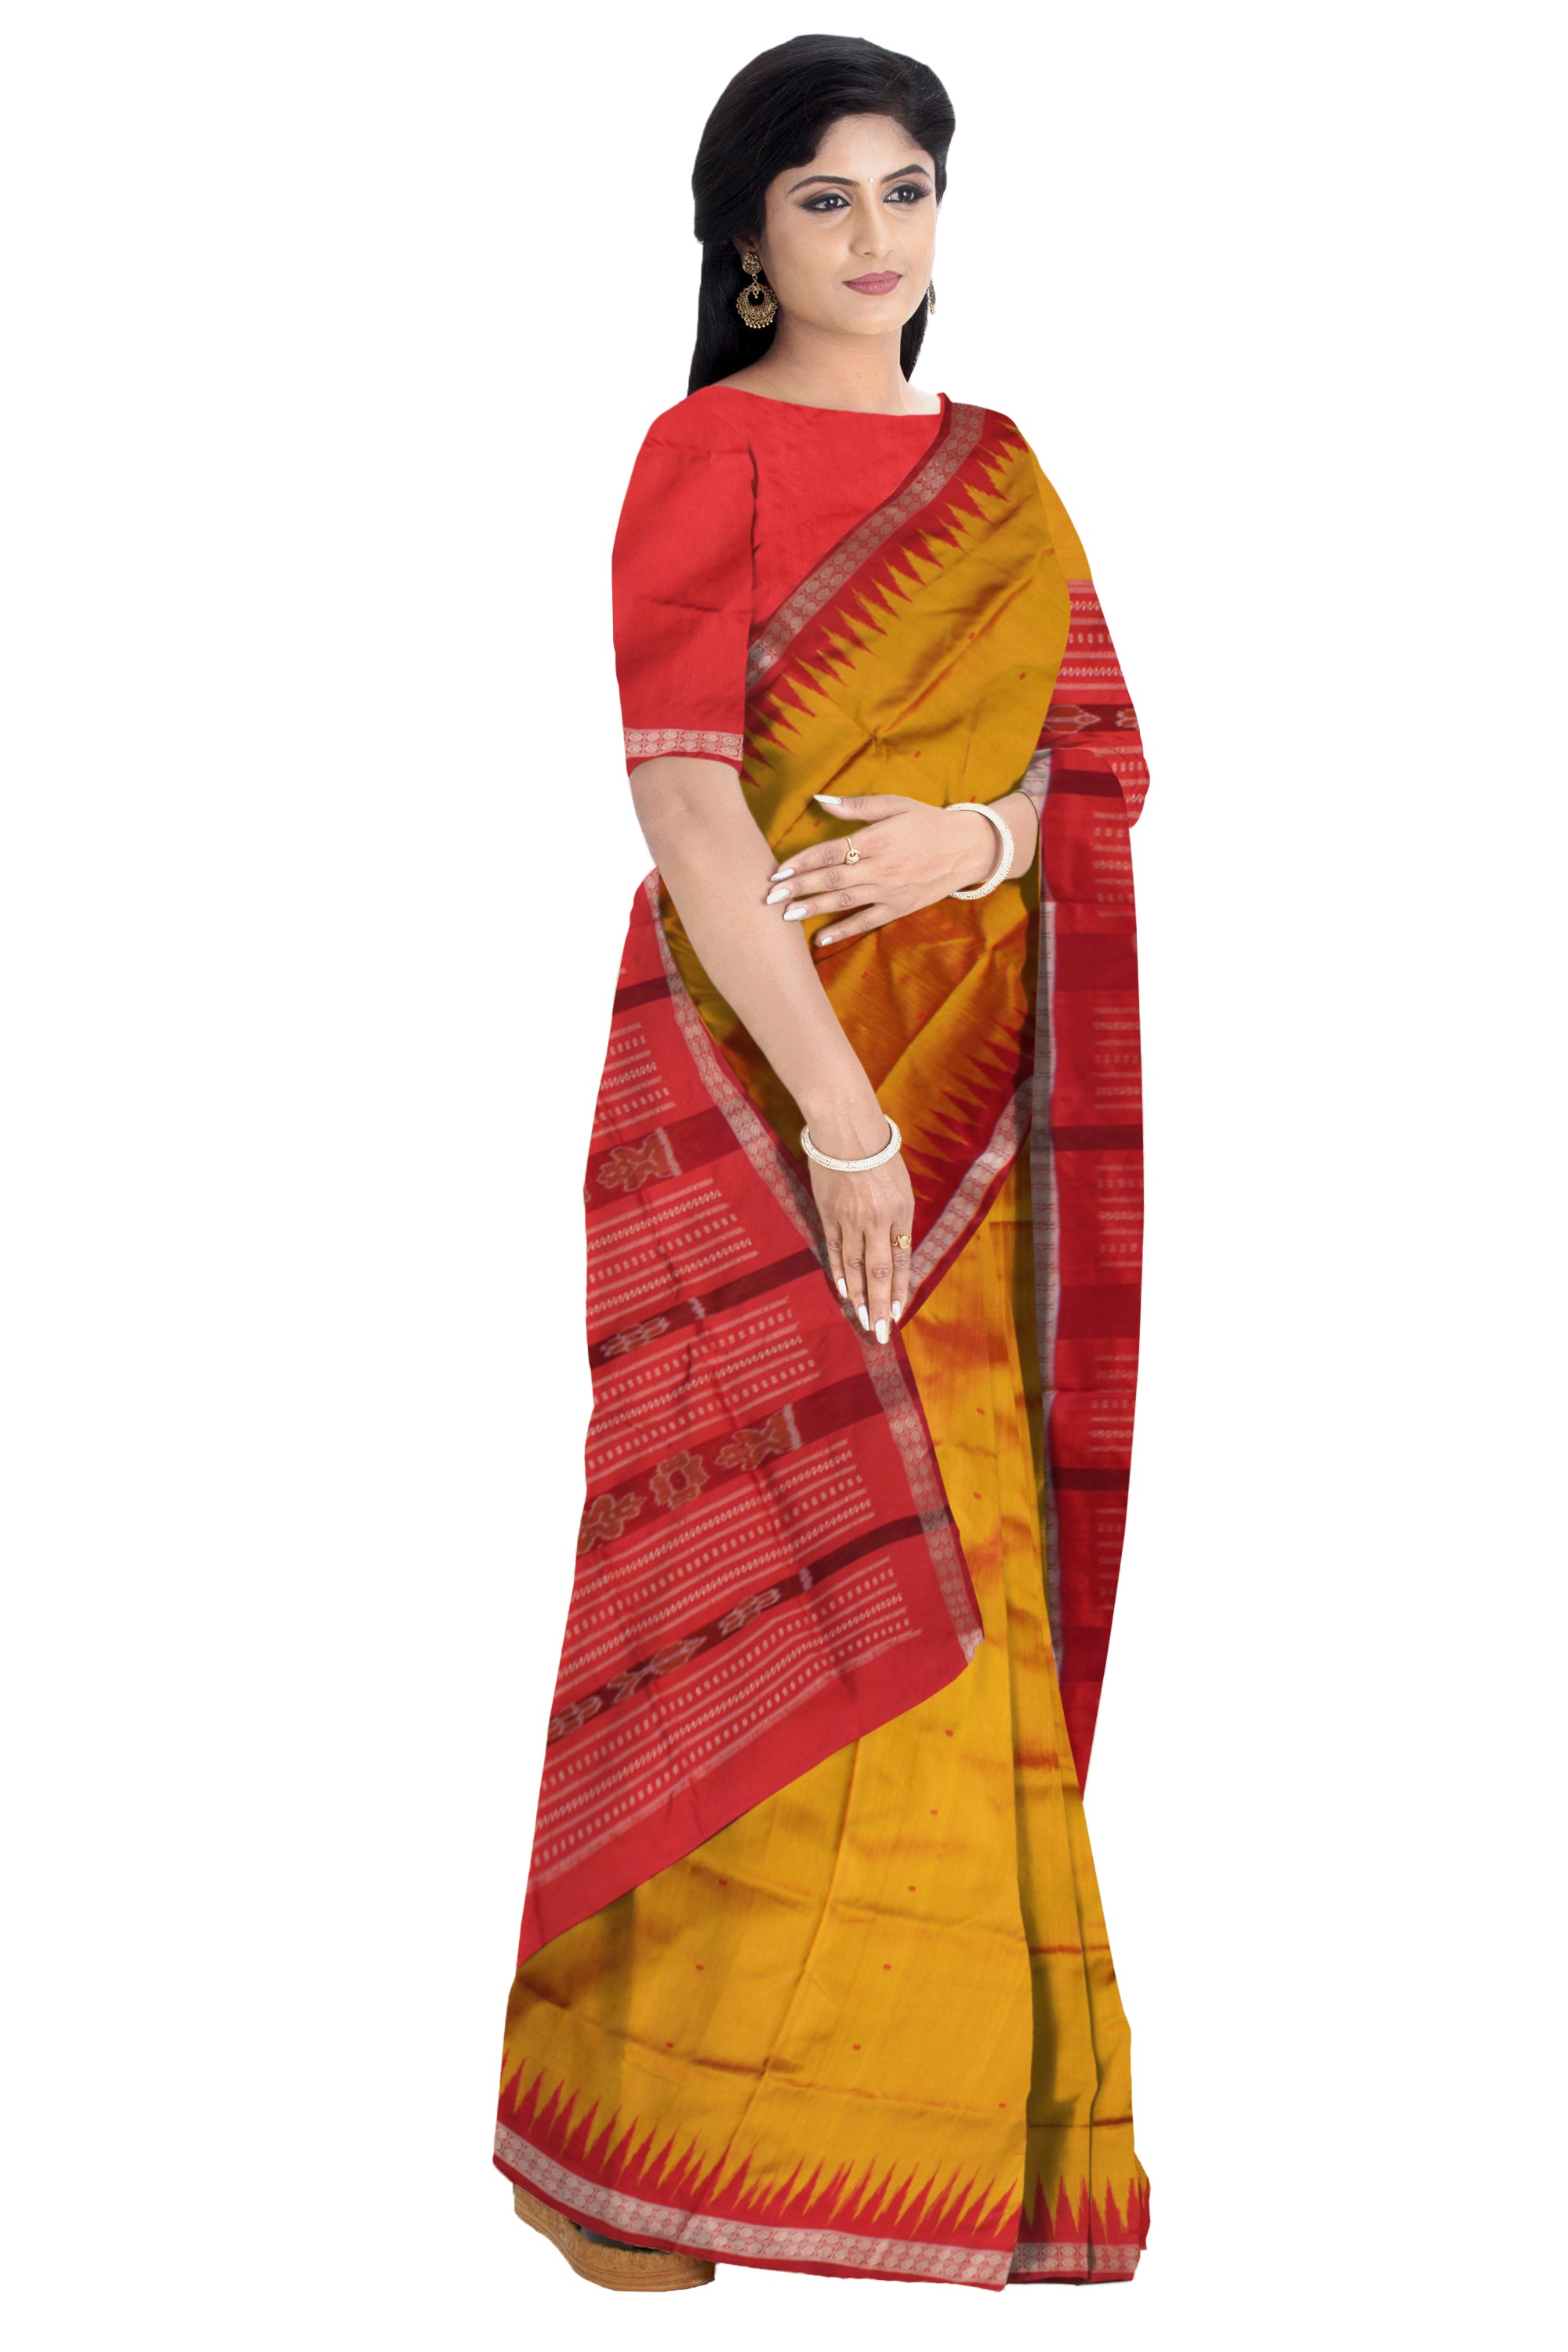 YELLOW AND RED COLOR SMALL BOOTY PATTERN PATA SAREE, WITH MATCHIG BLOUSE PIECE. - Koshali Arts & Crafts Enterprise